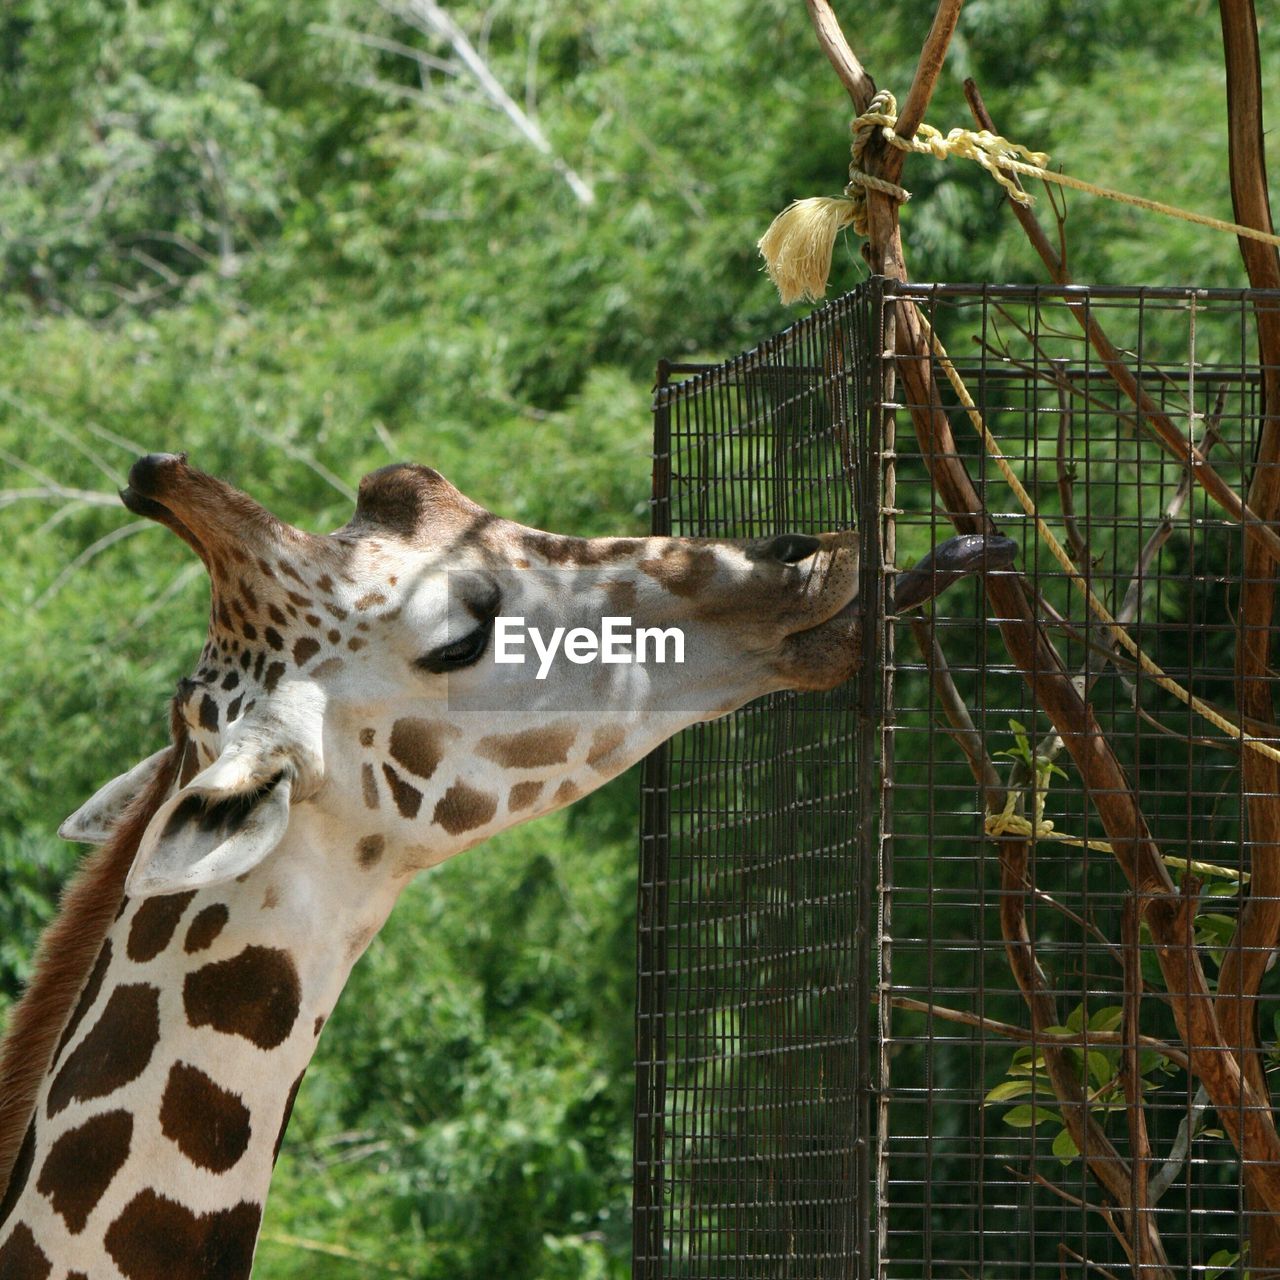 Giraffe eating plant through fence during sunny day